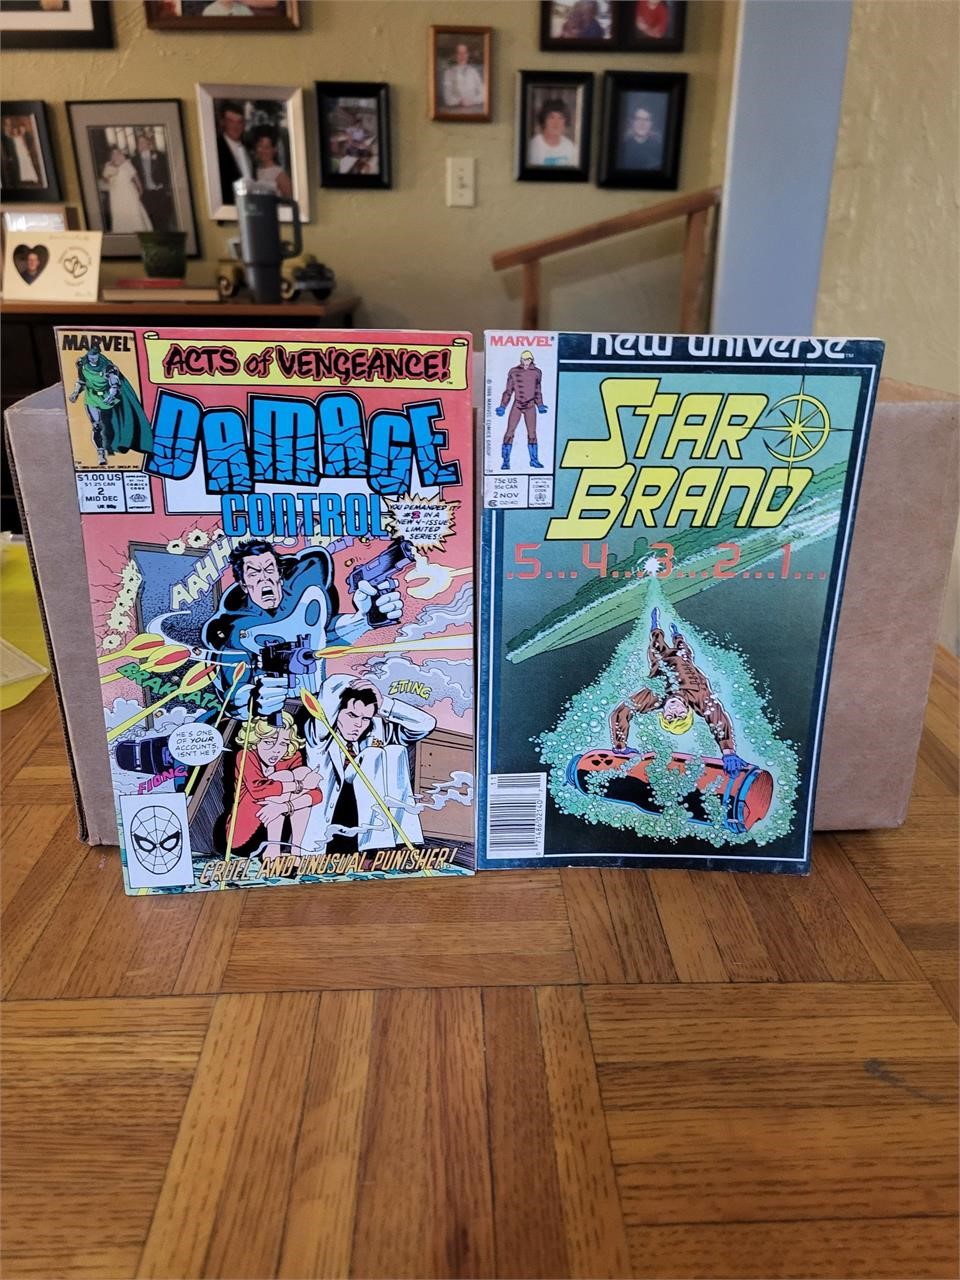 Merry Comic Book Auction